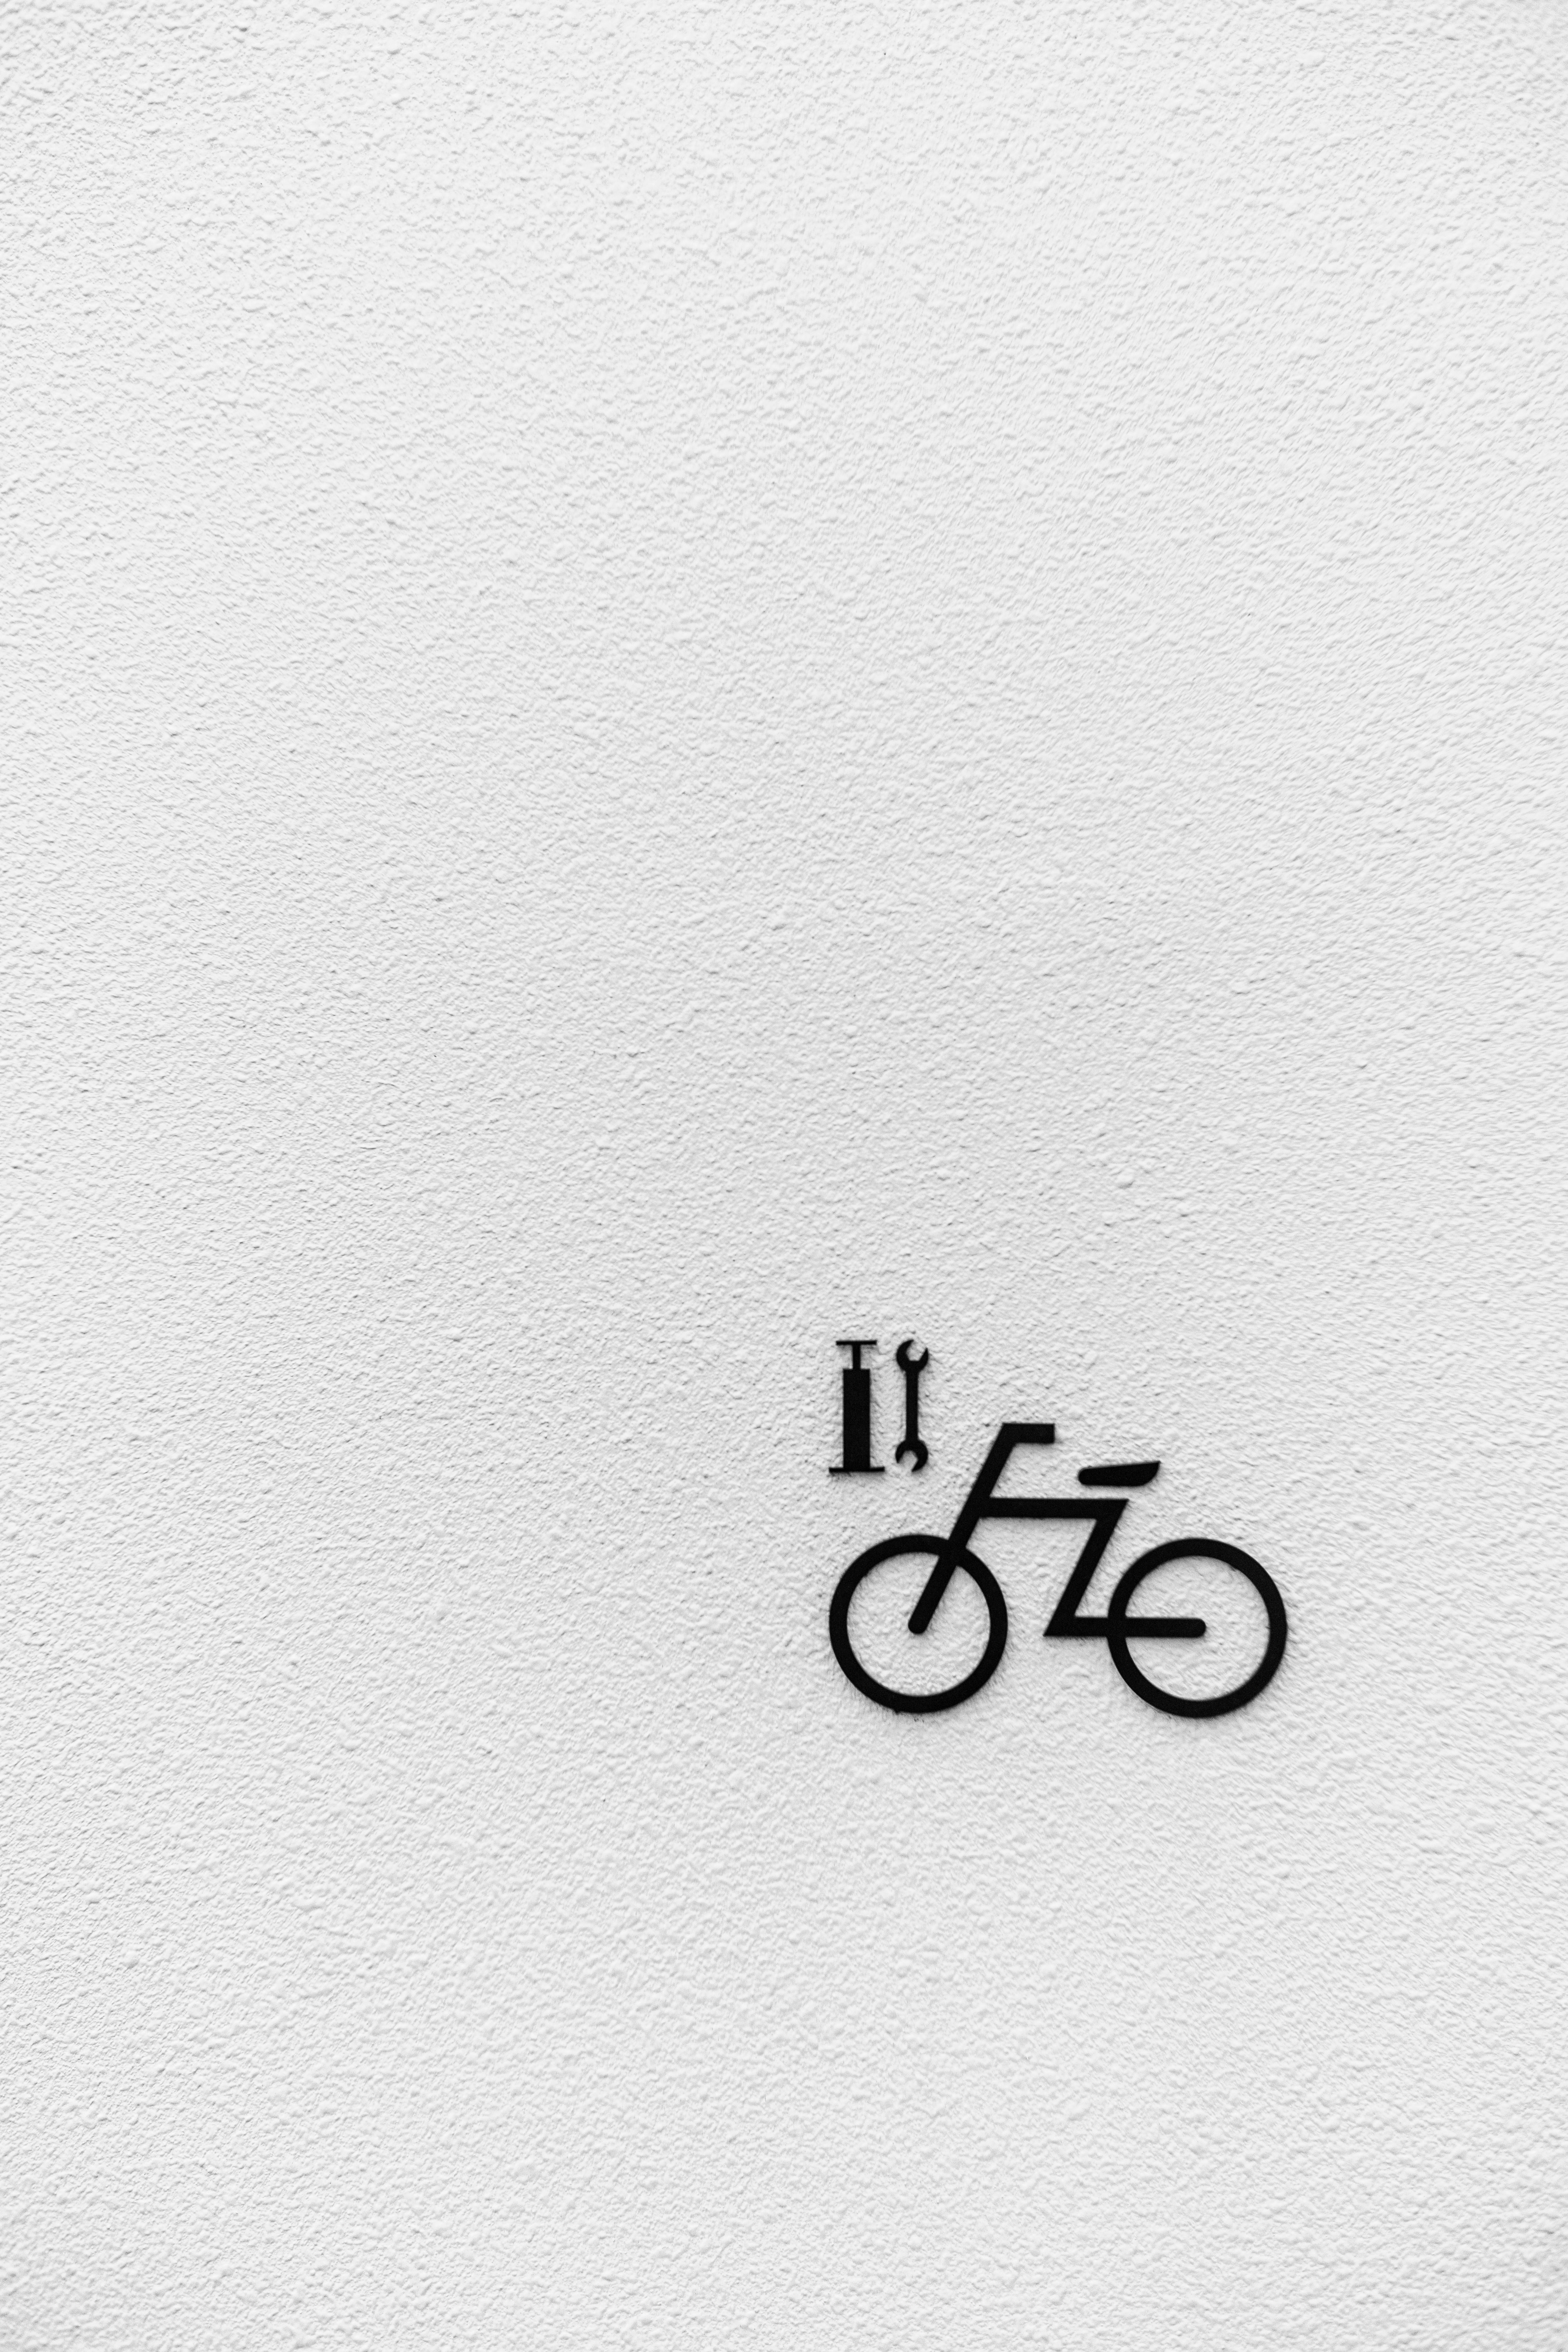 bicycle, texture, textures, wall